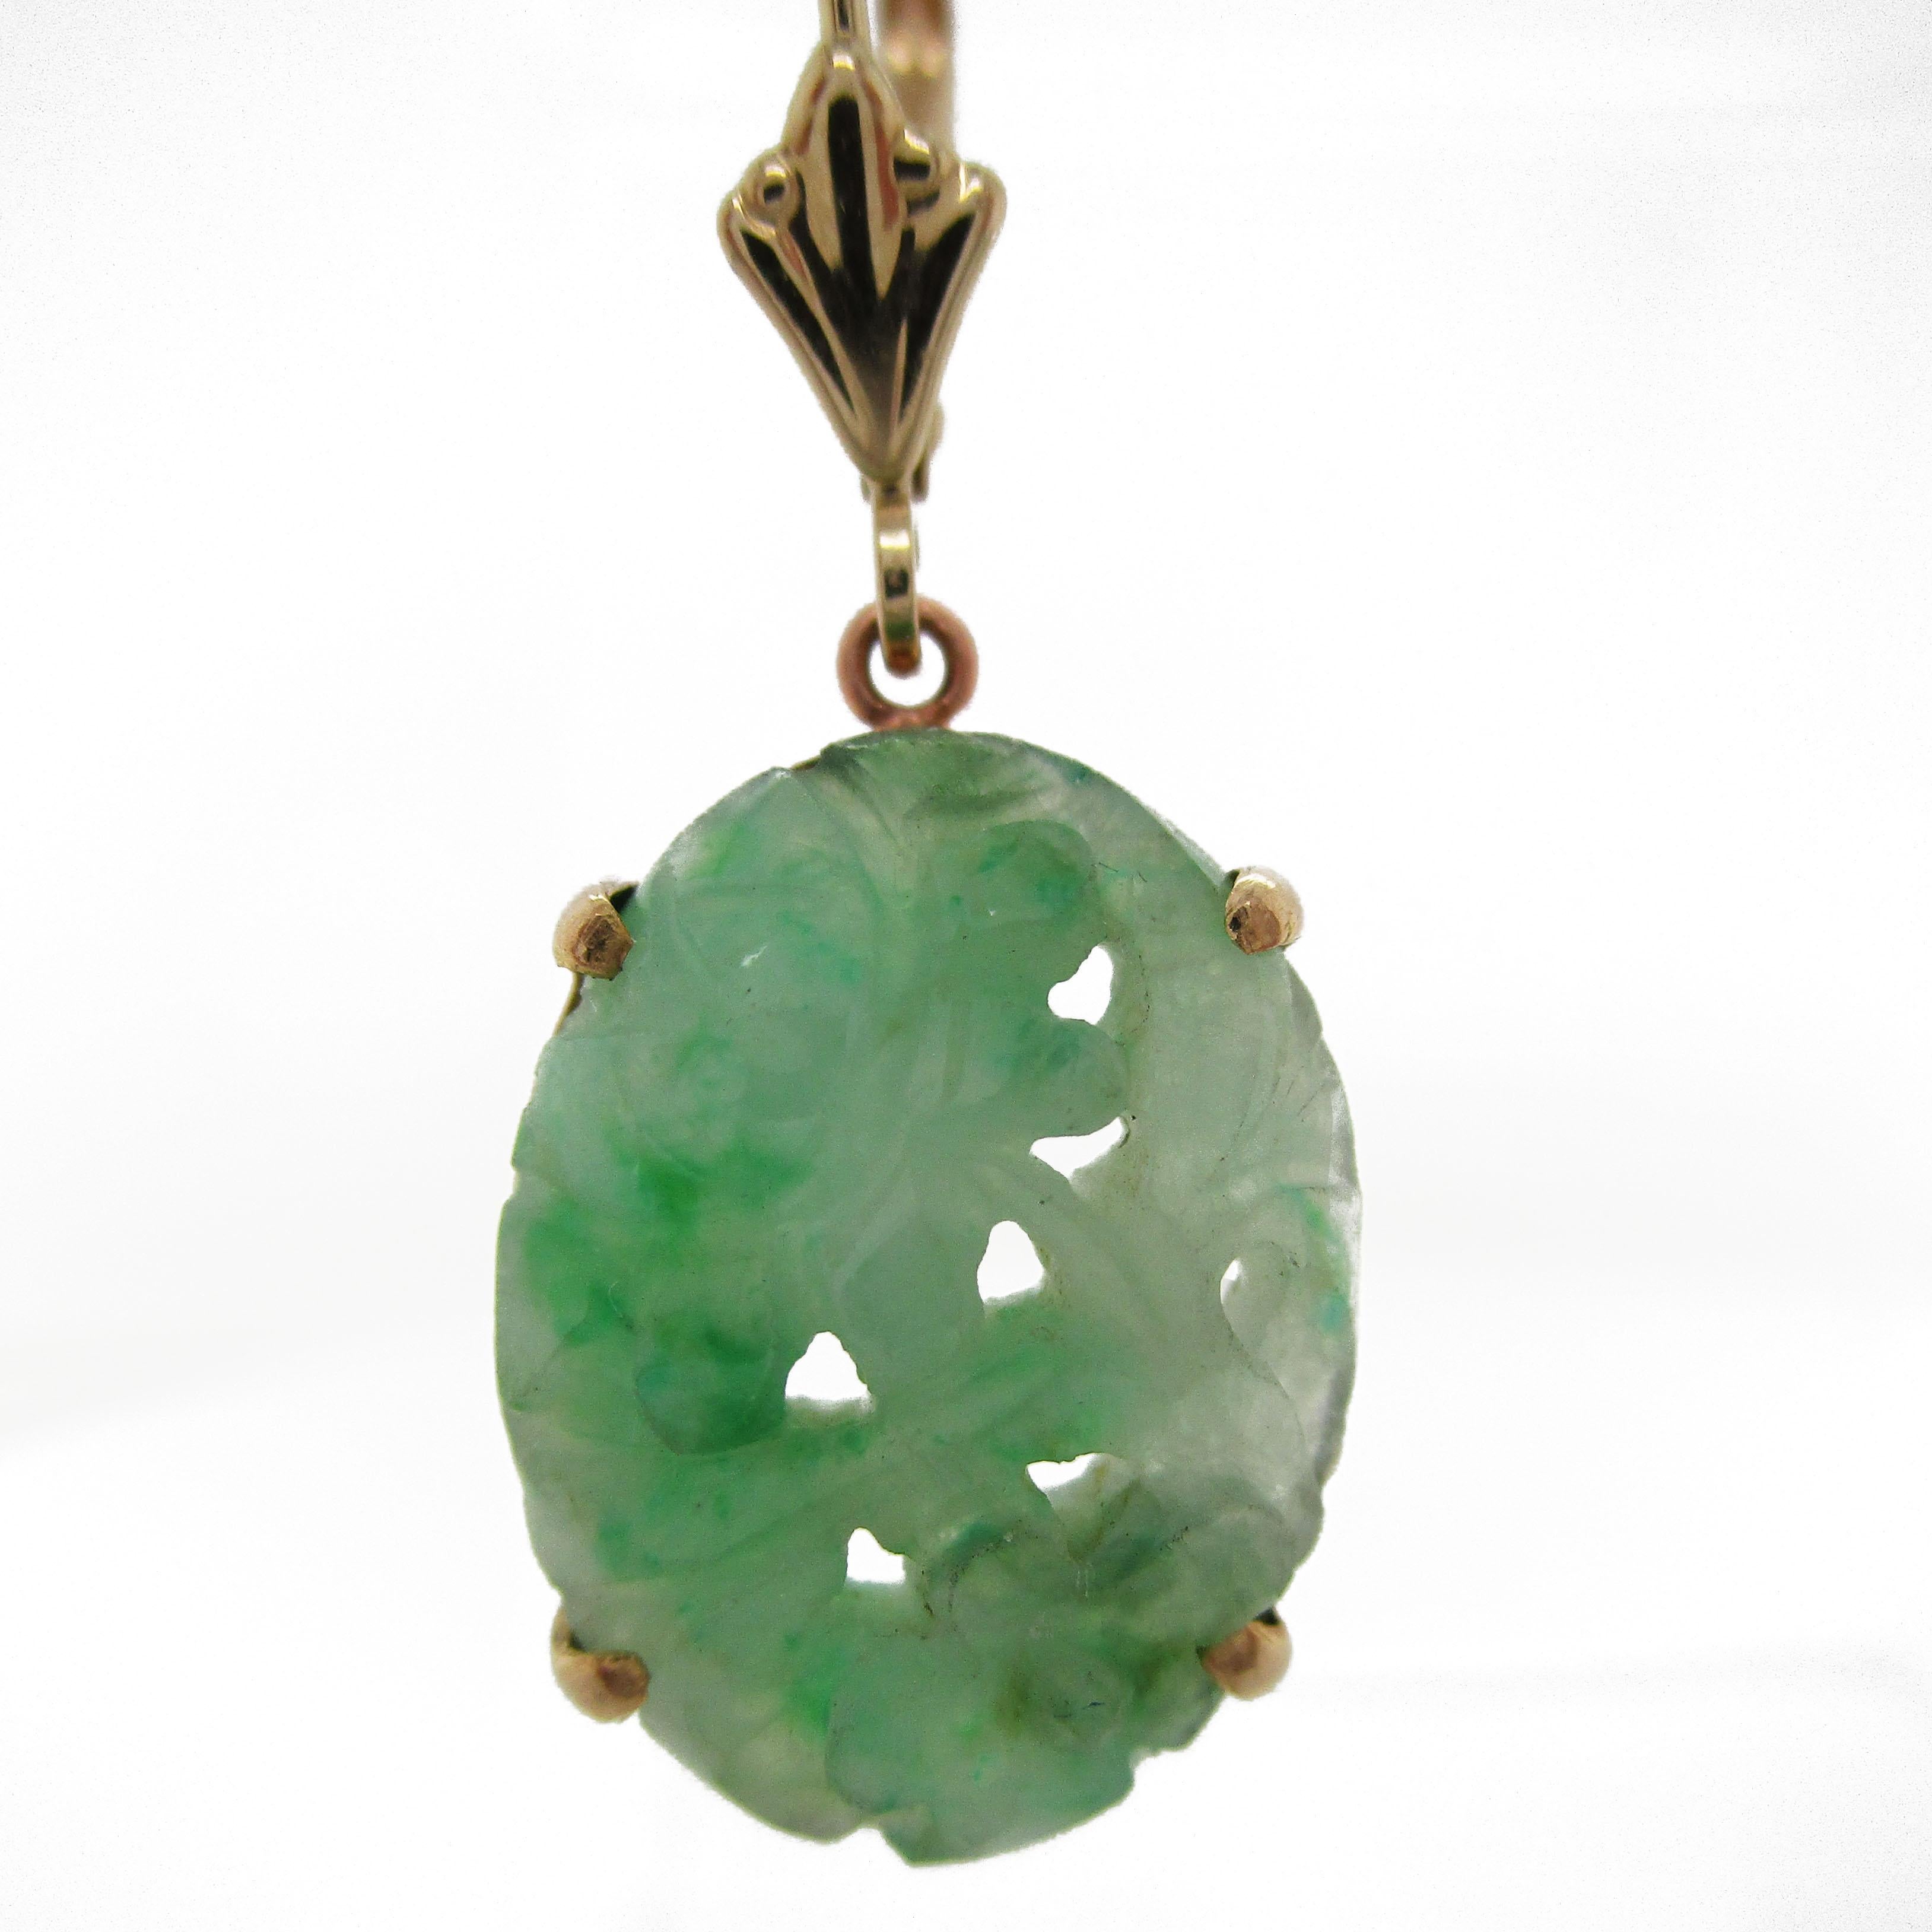 These earrings paint a picture of a setting sun over a quiet garden, with the leaves rustling softly and the smell of flowers sweet in the air. The jadeite drops are hand carved and fully translucent with an enchanting pale green color. The frame